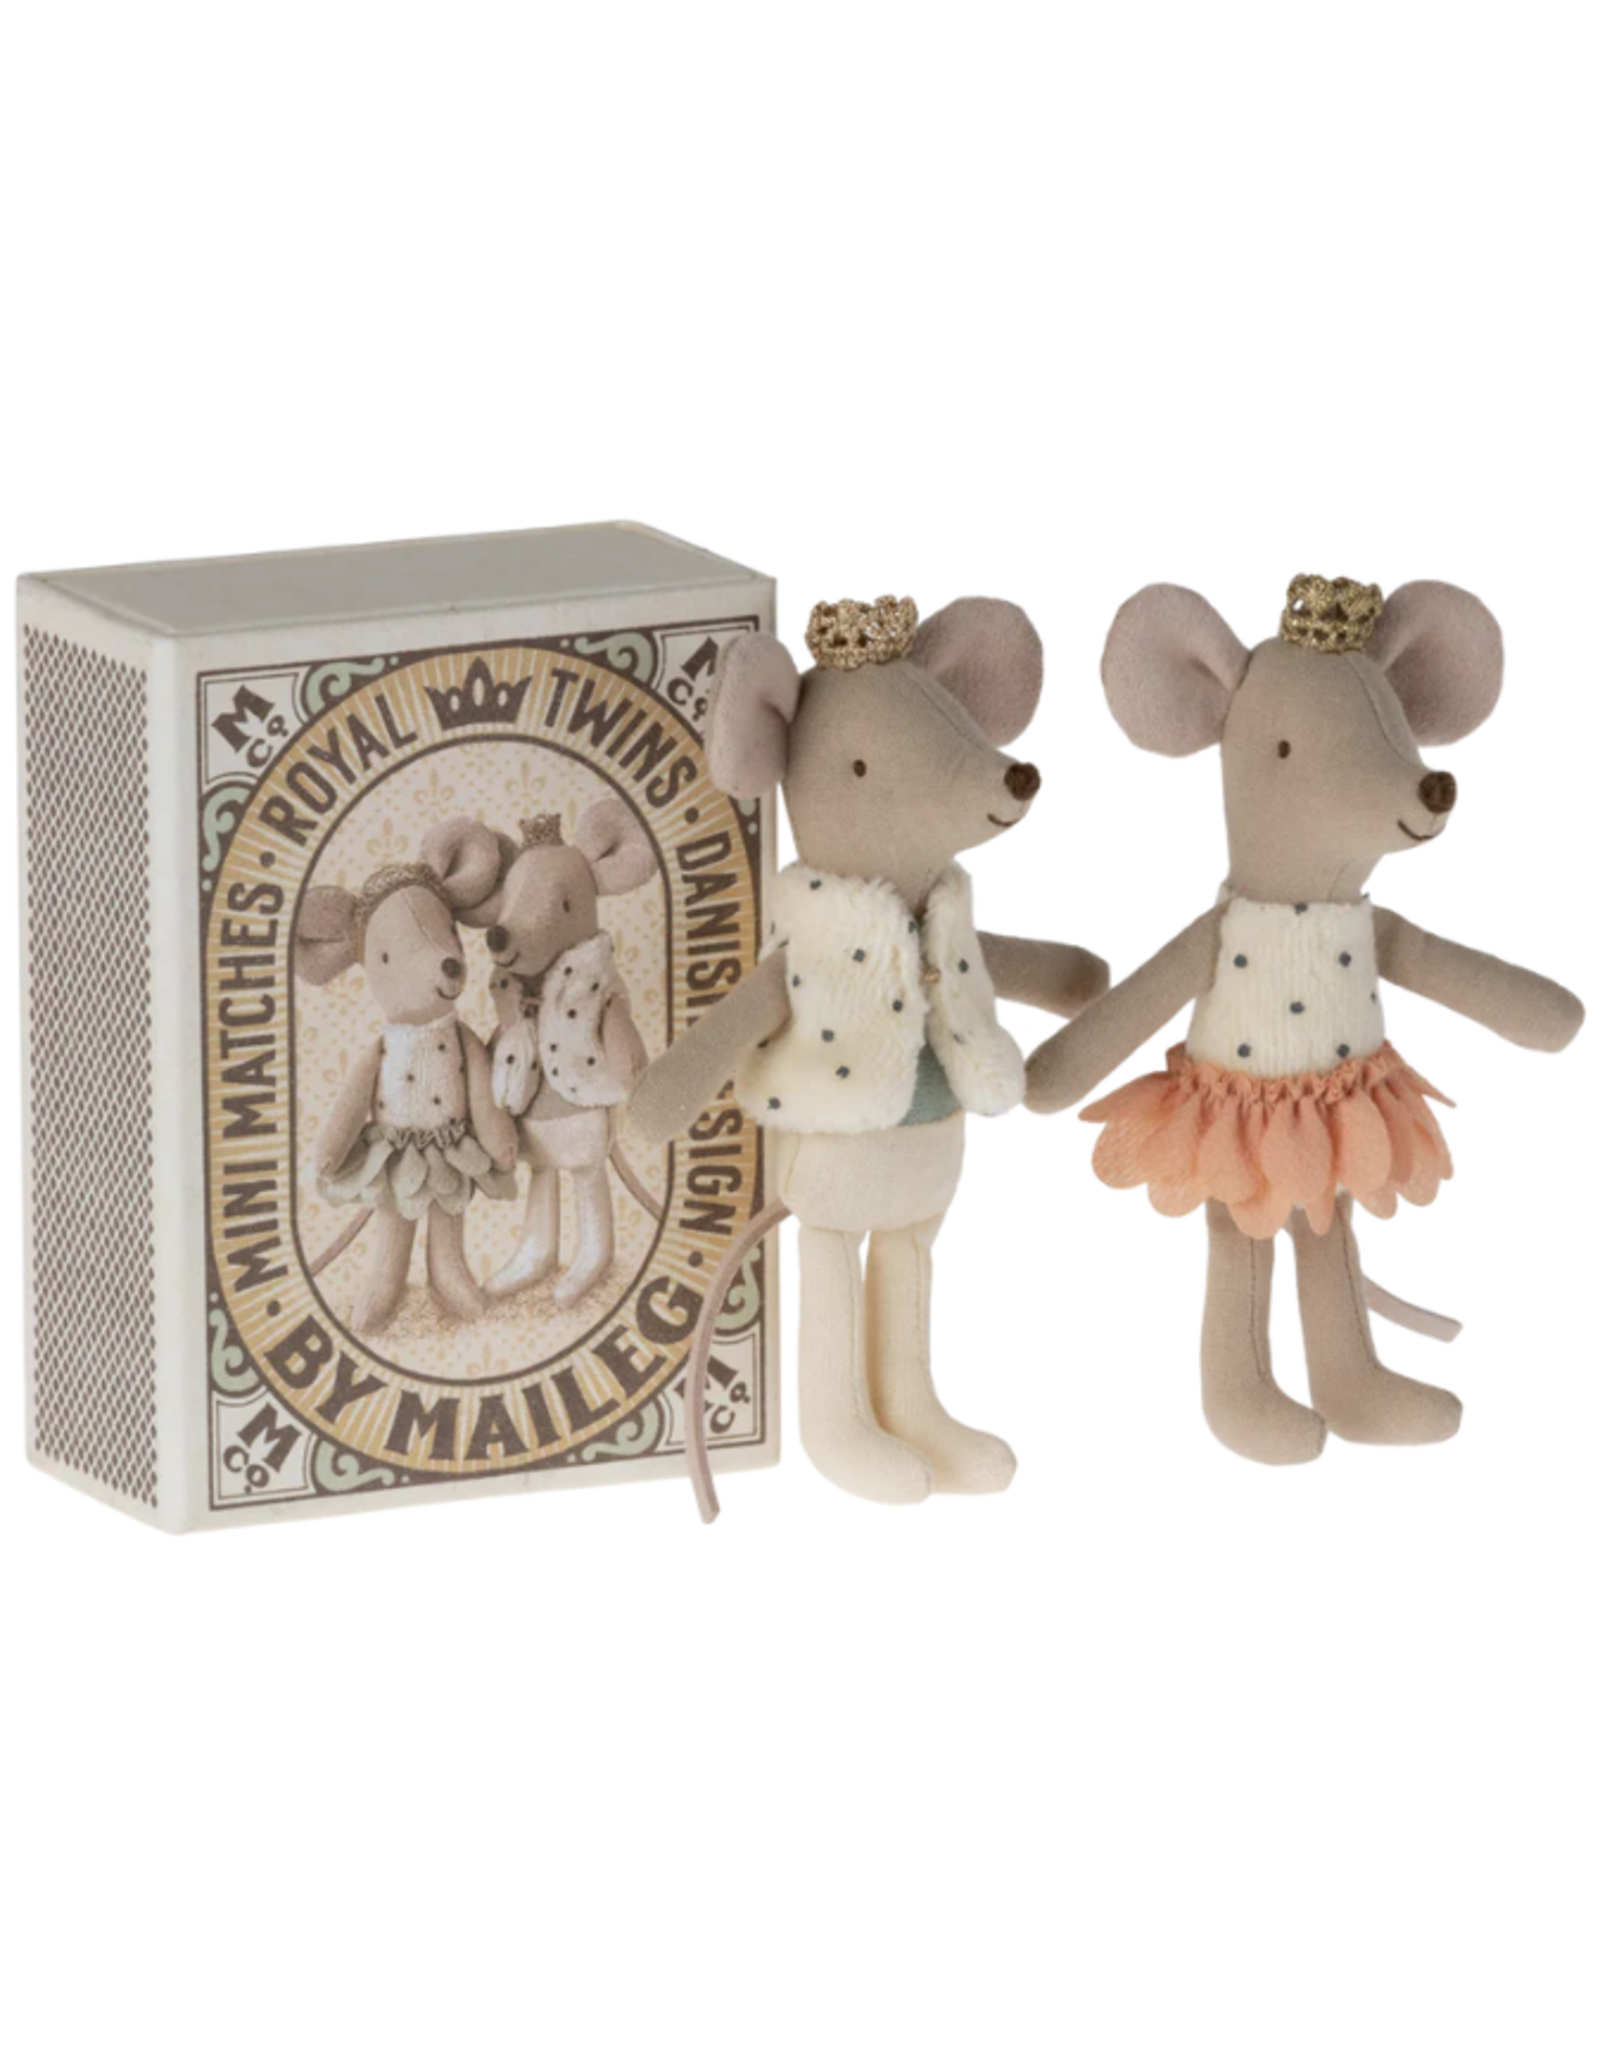 MAILEG Royals twins mice, little sister & brother in box